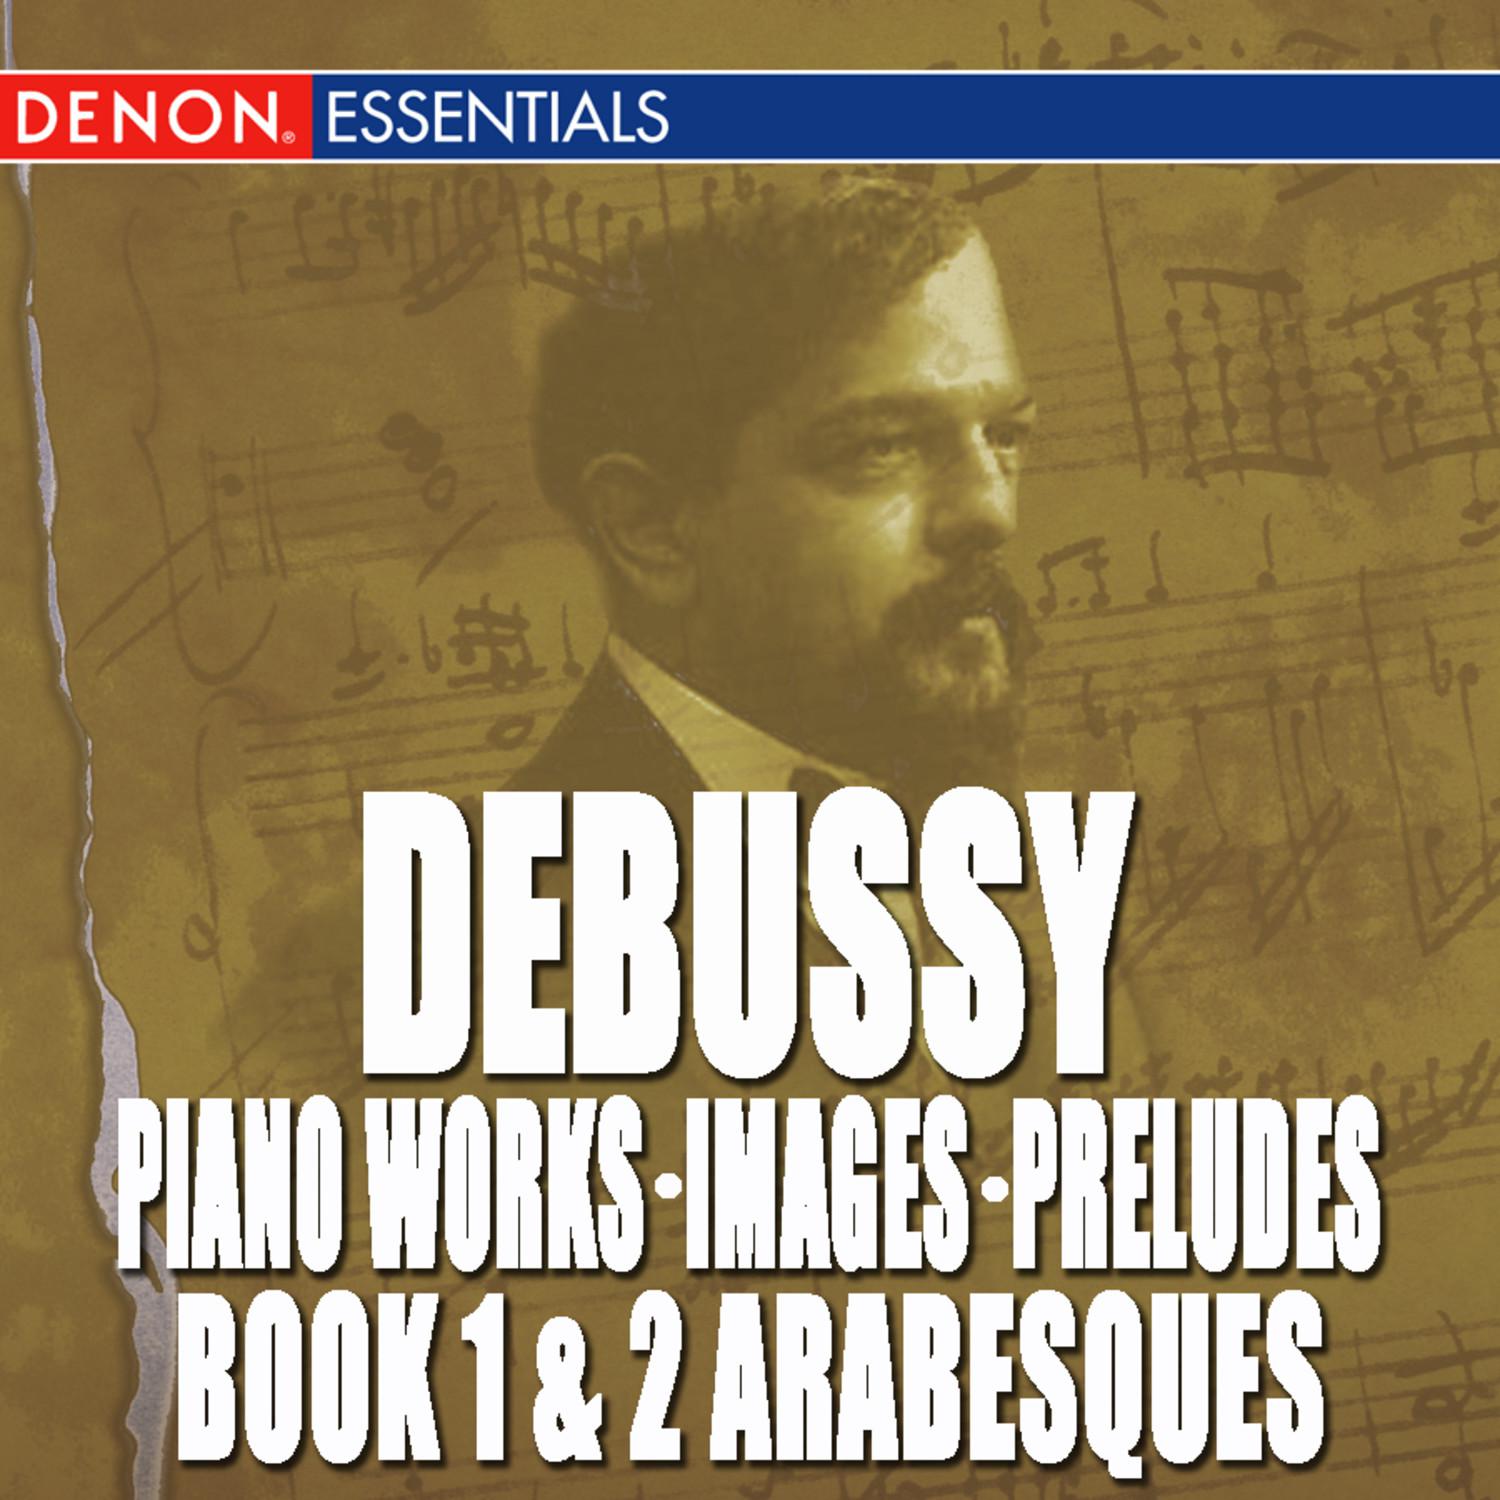 Debussy: Piano Works, Images, Preludes Book 1 & 2, Arabesques